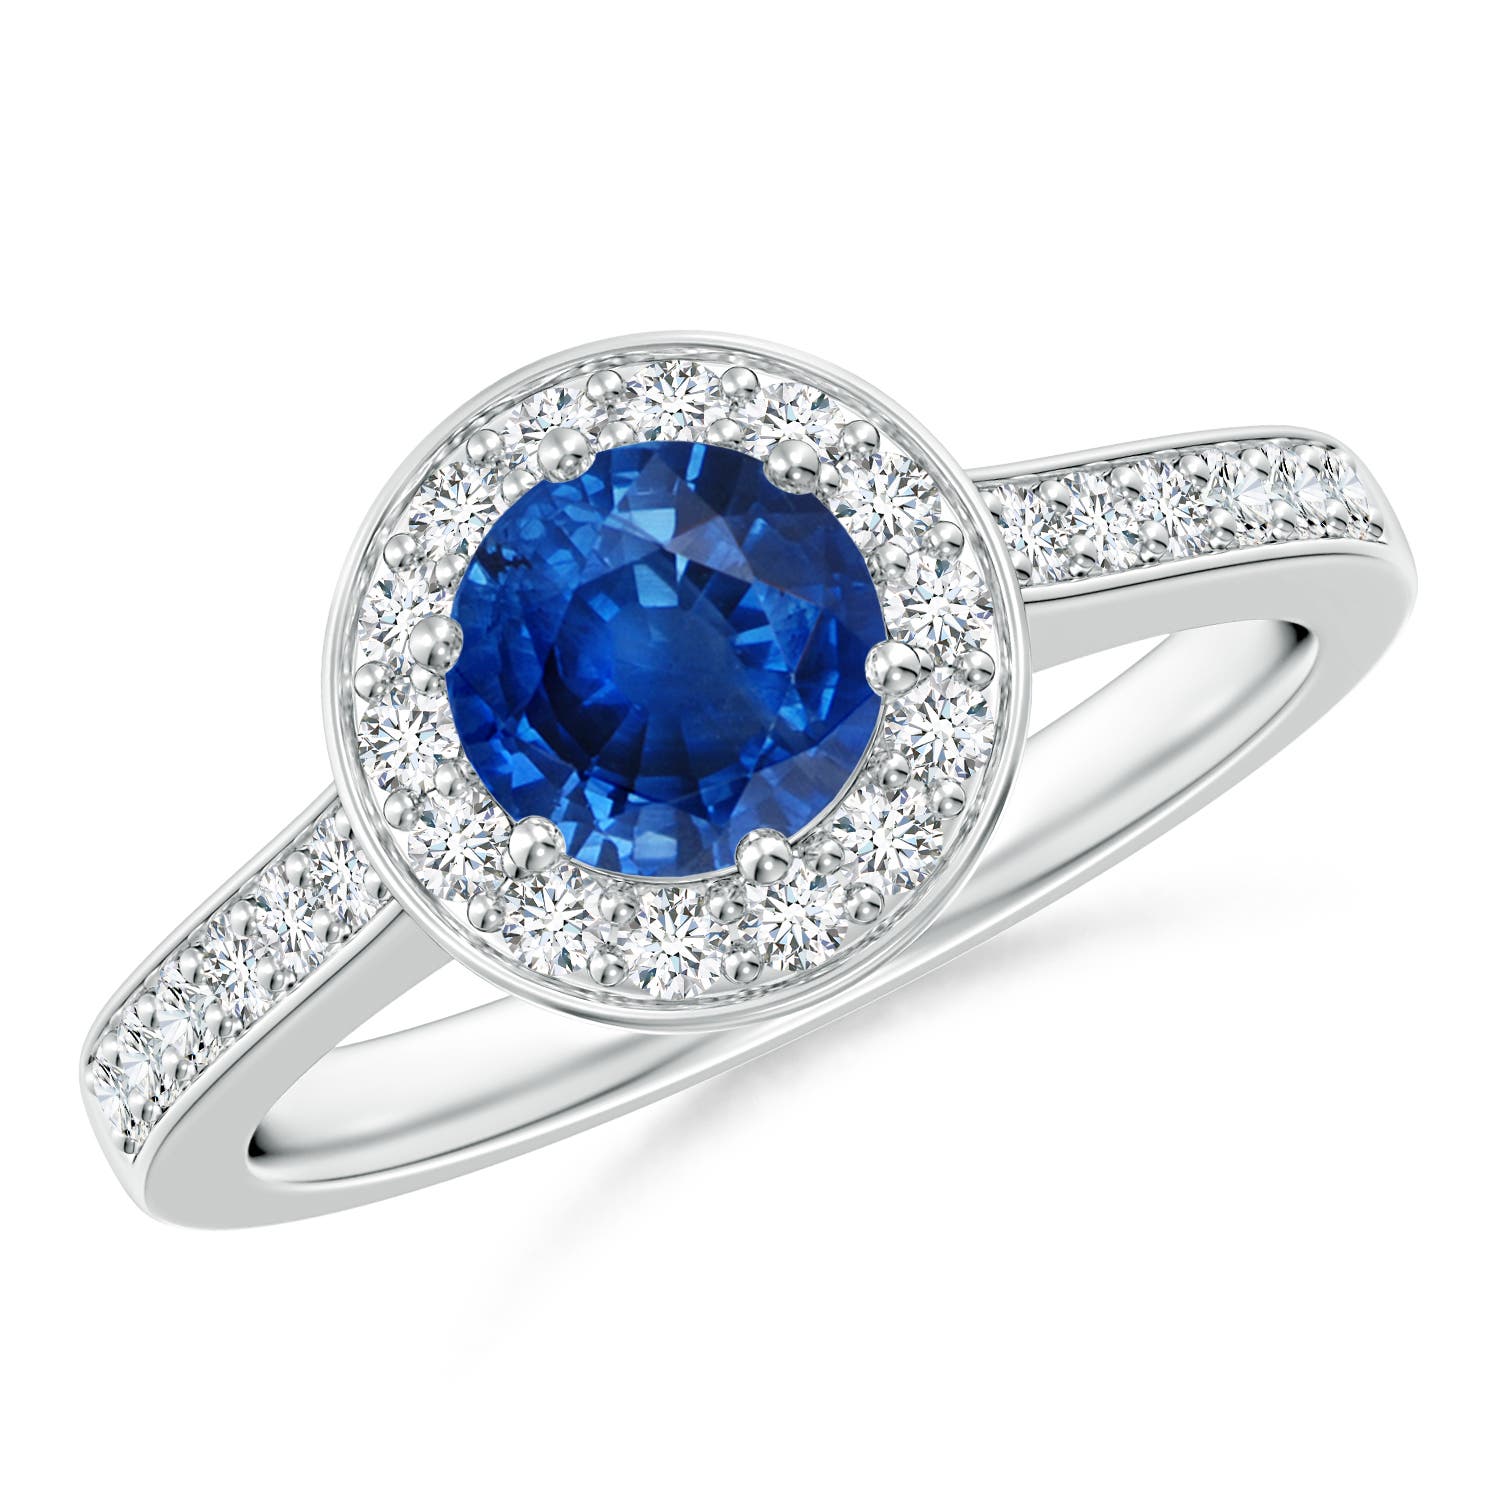 Blue Sapphire Halo Ring with Diamond Accents | Angara